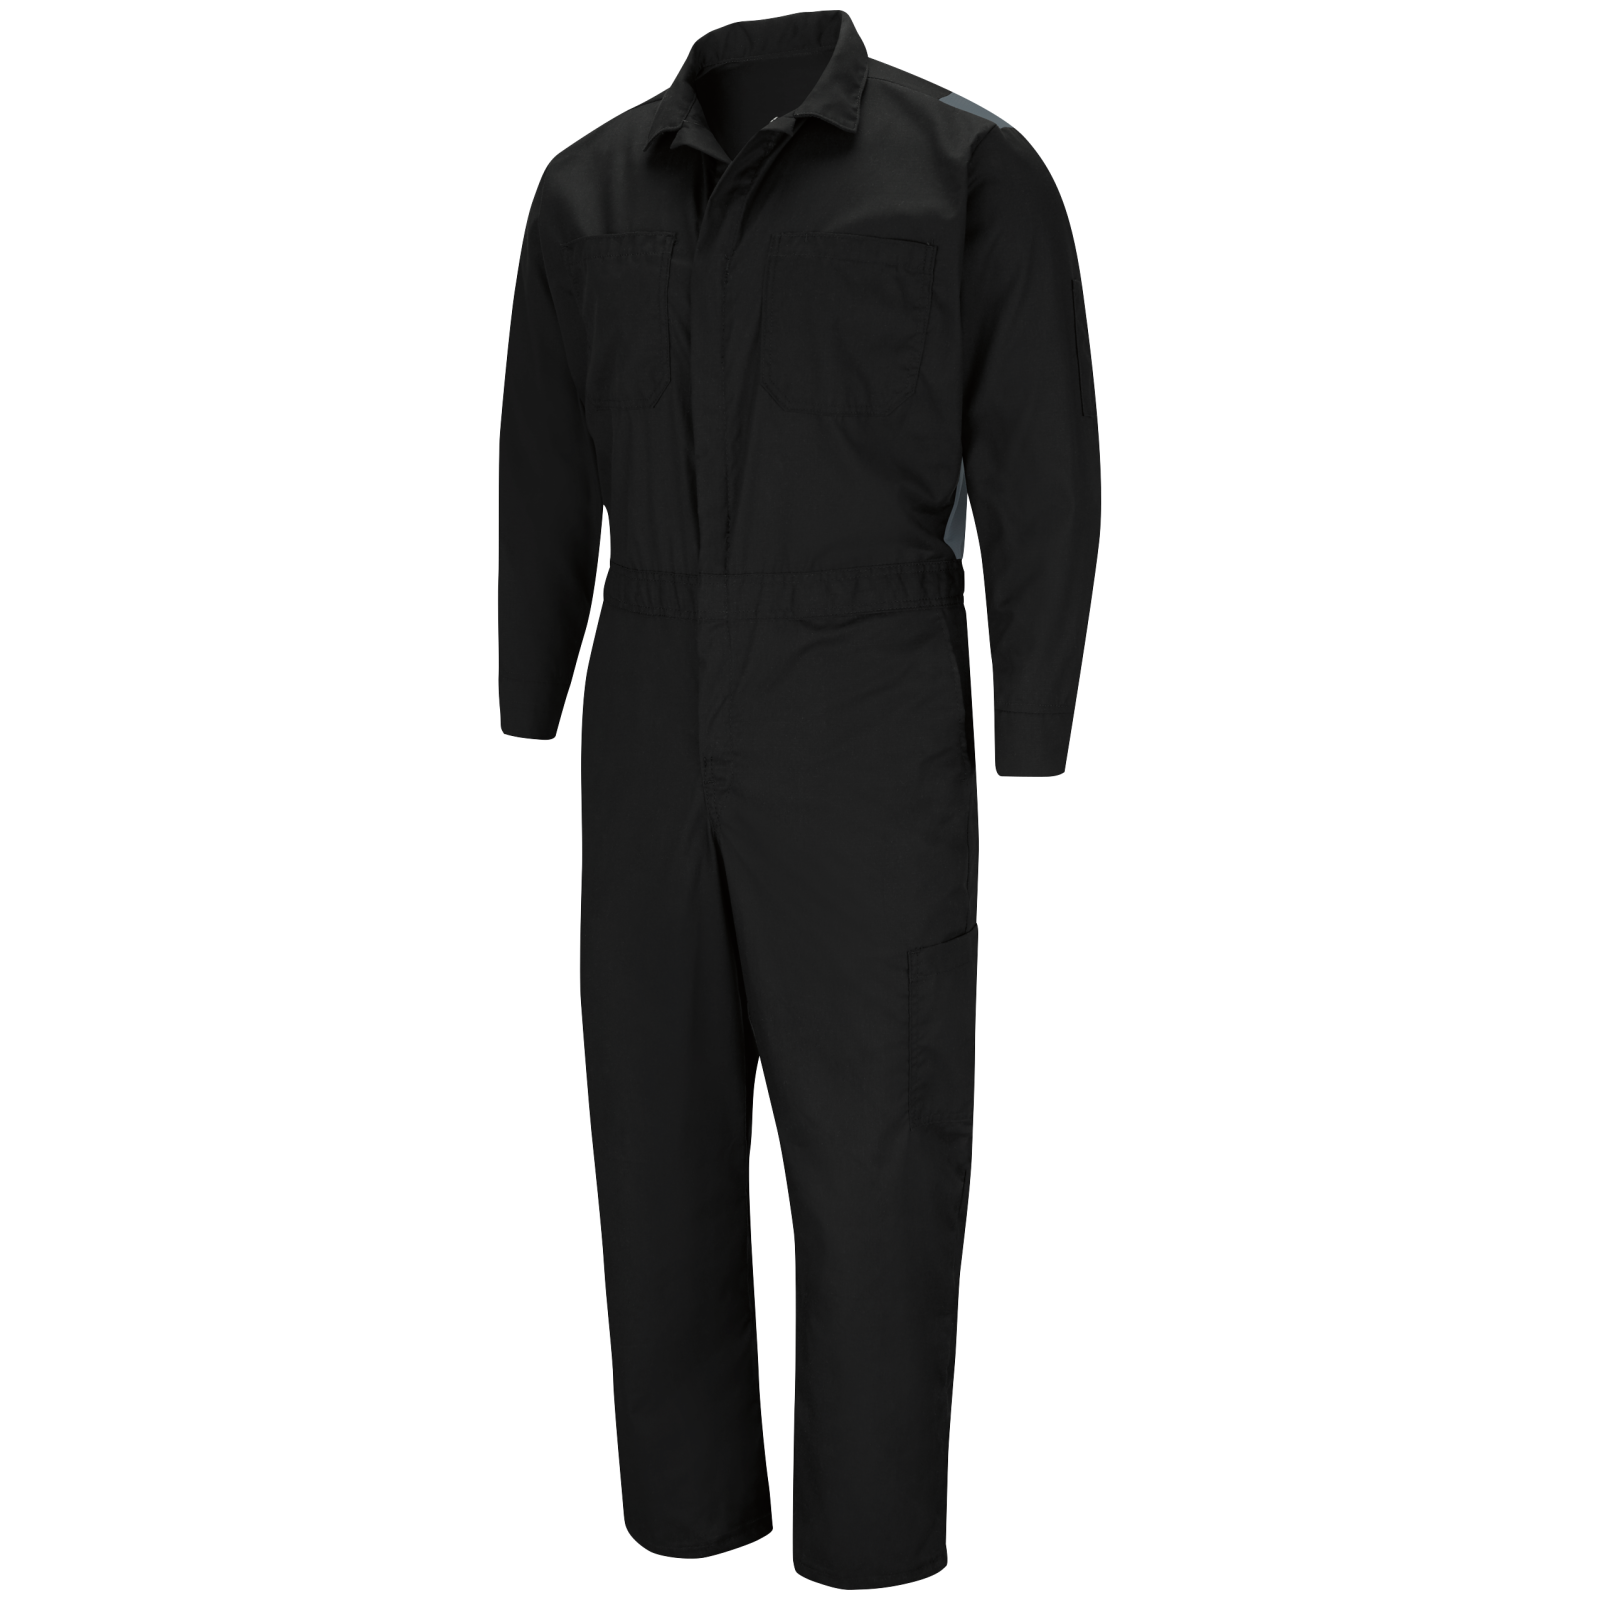 Performance Plus Lightweight Coverall with OilBlok Technology